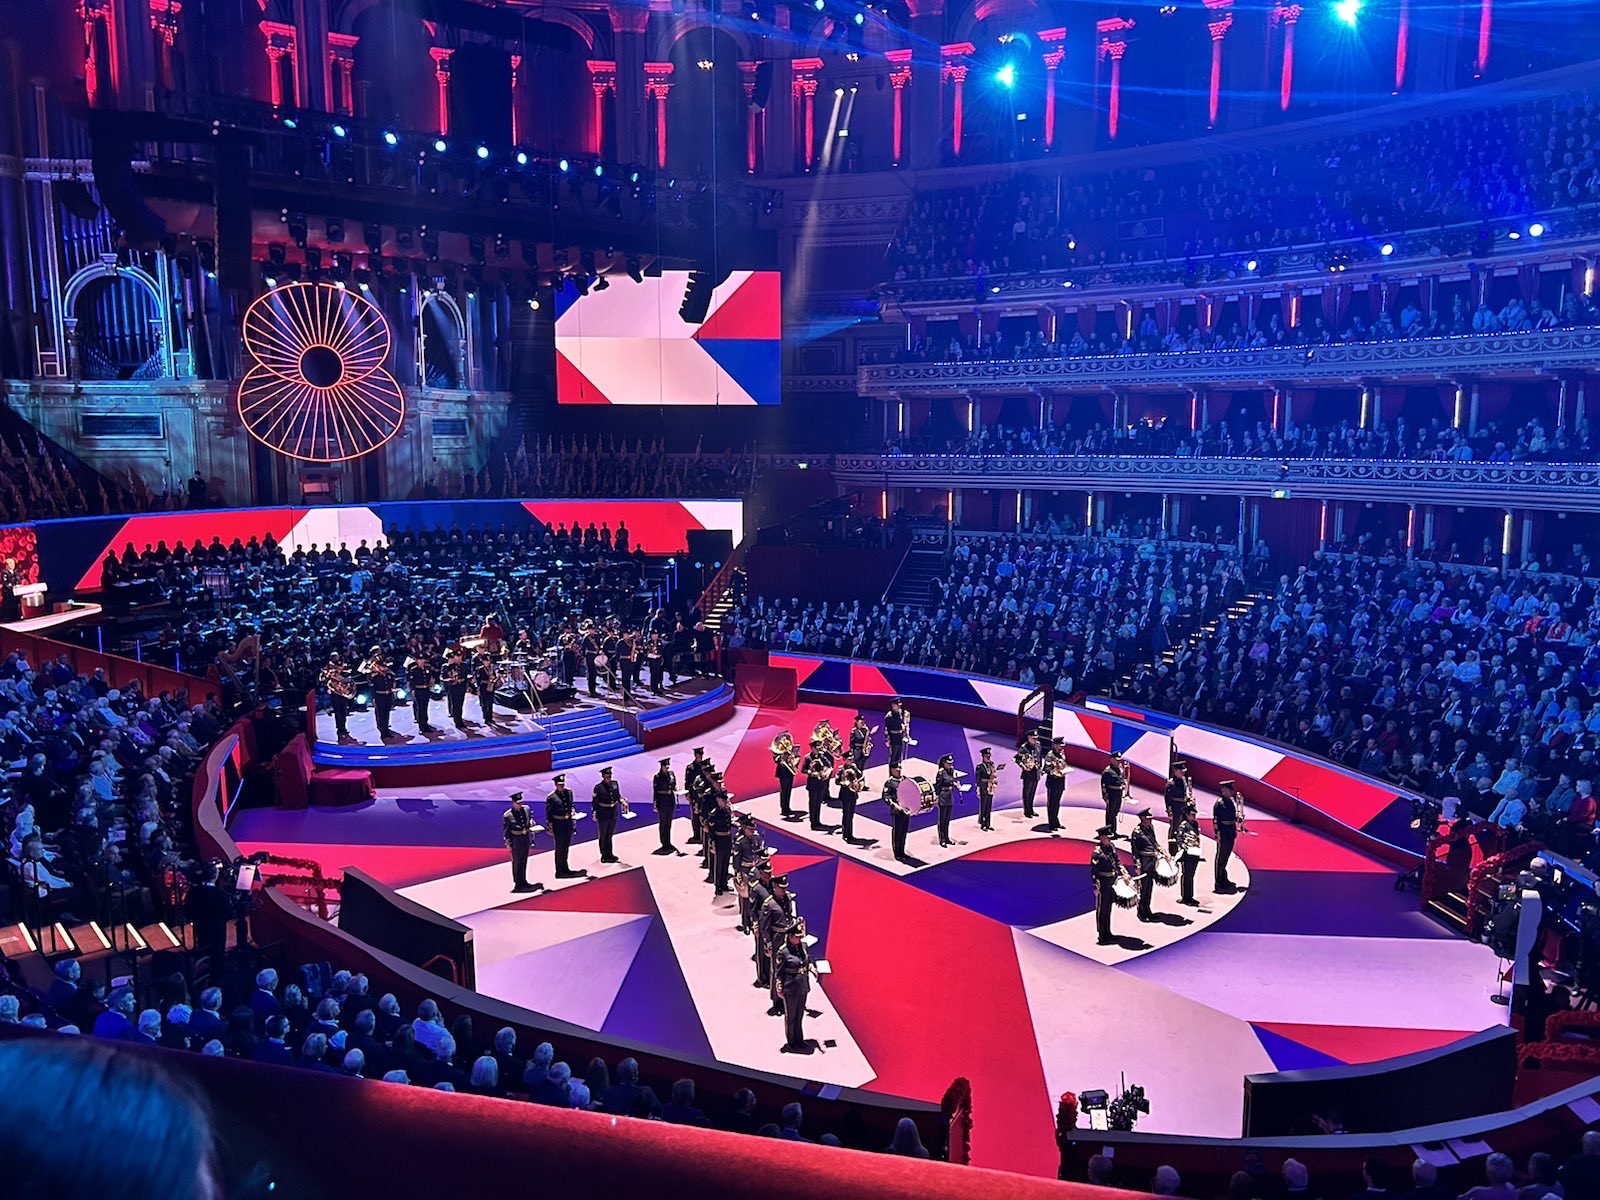 Festival of Remembrance in the Royal Albert Hall, illuminated blue